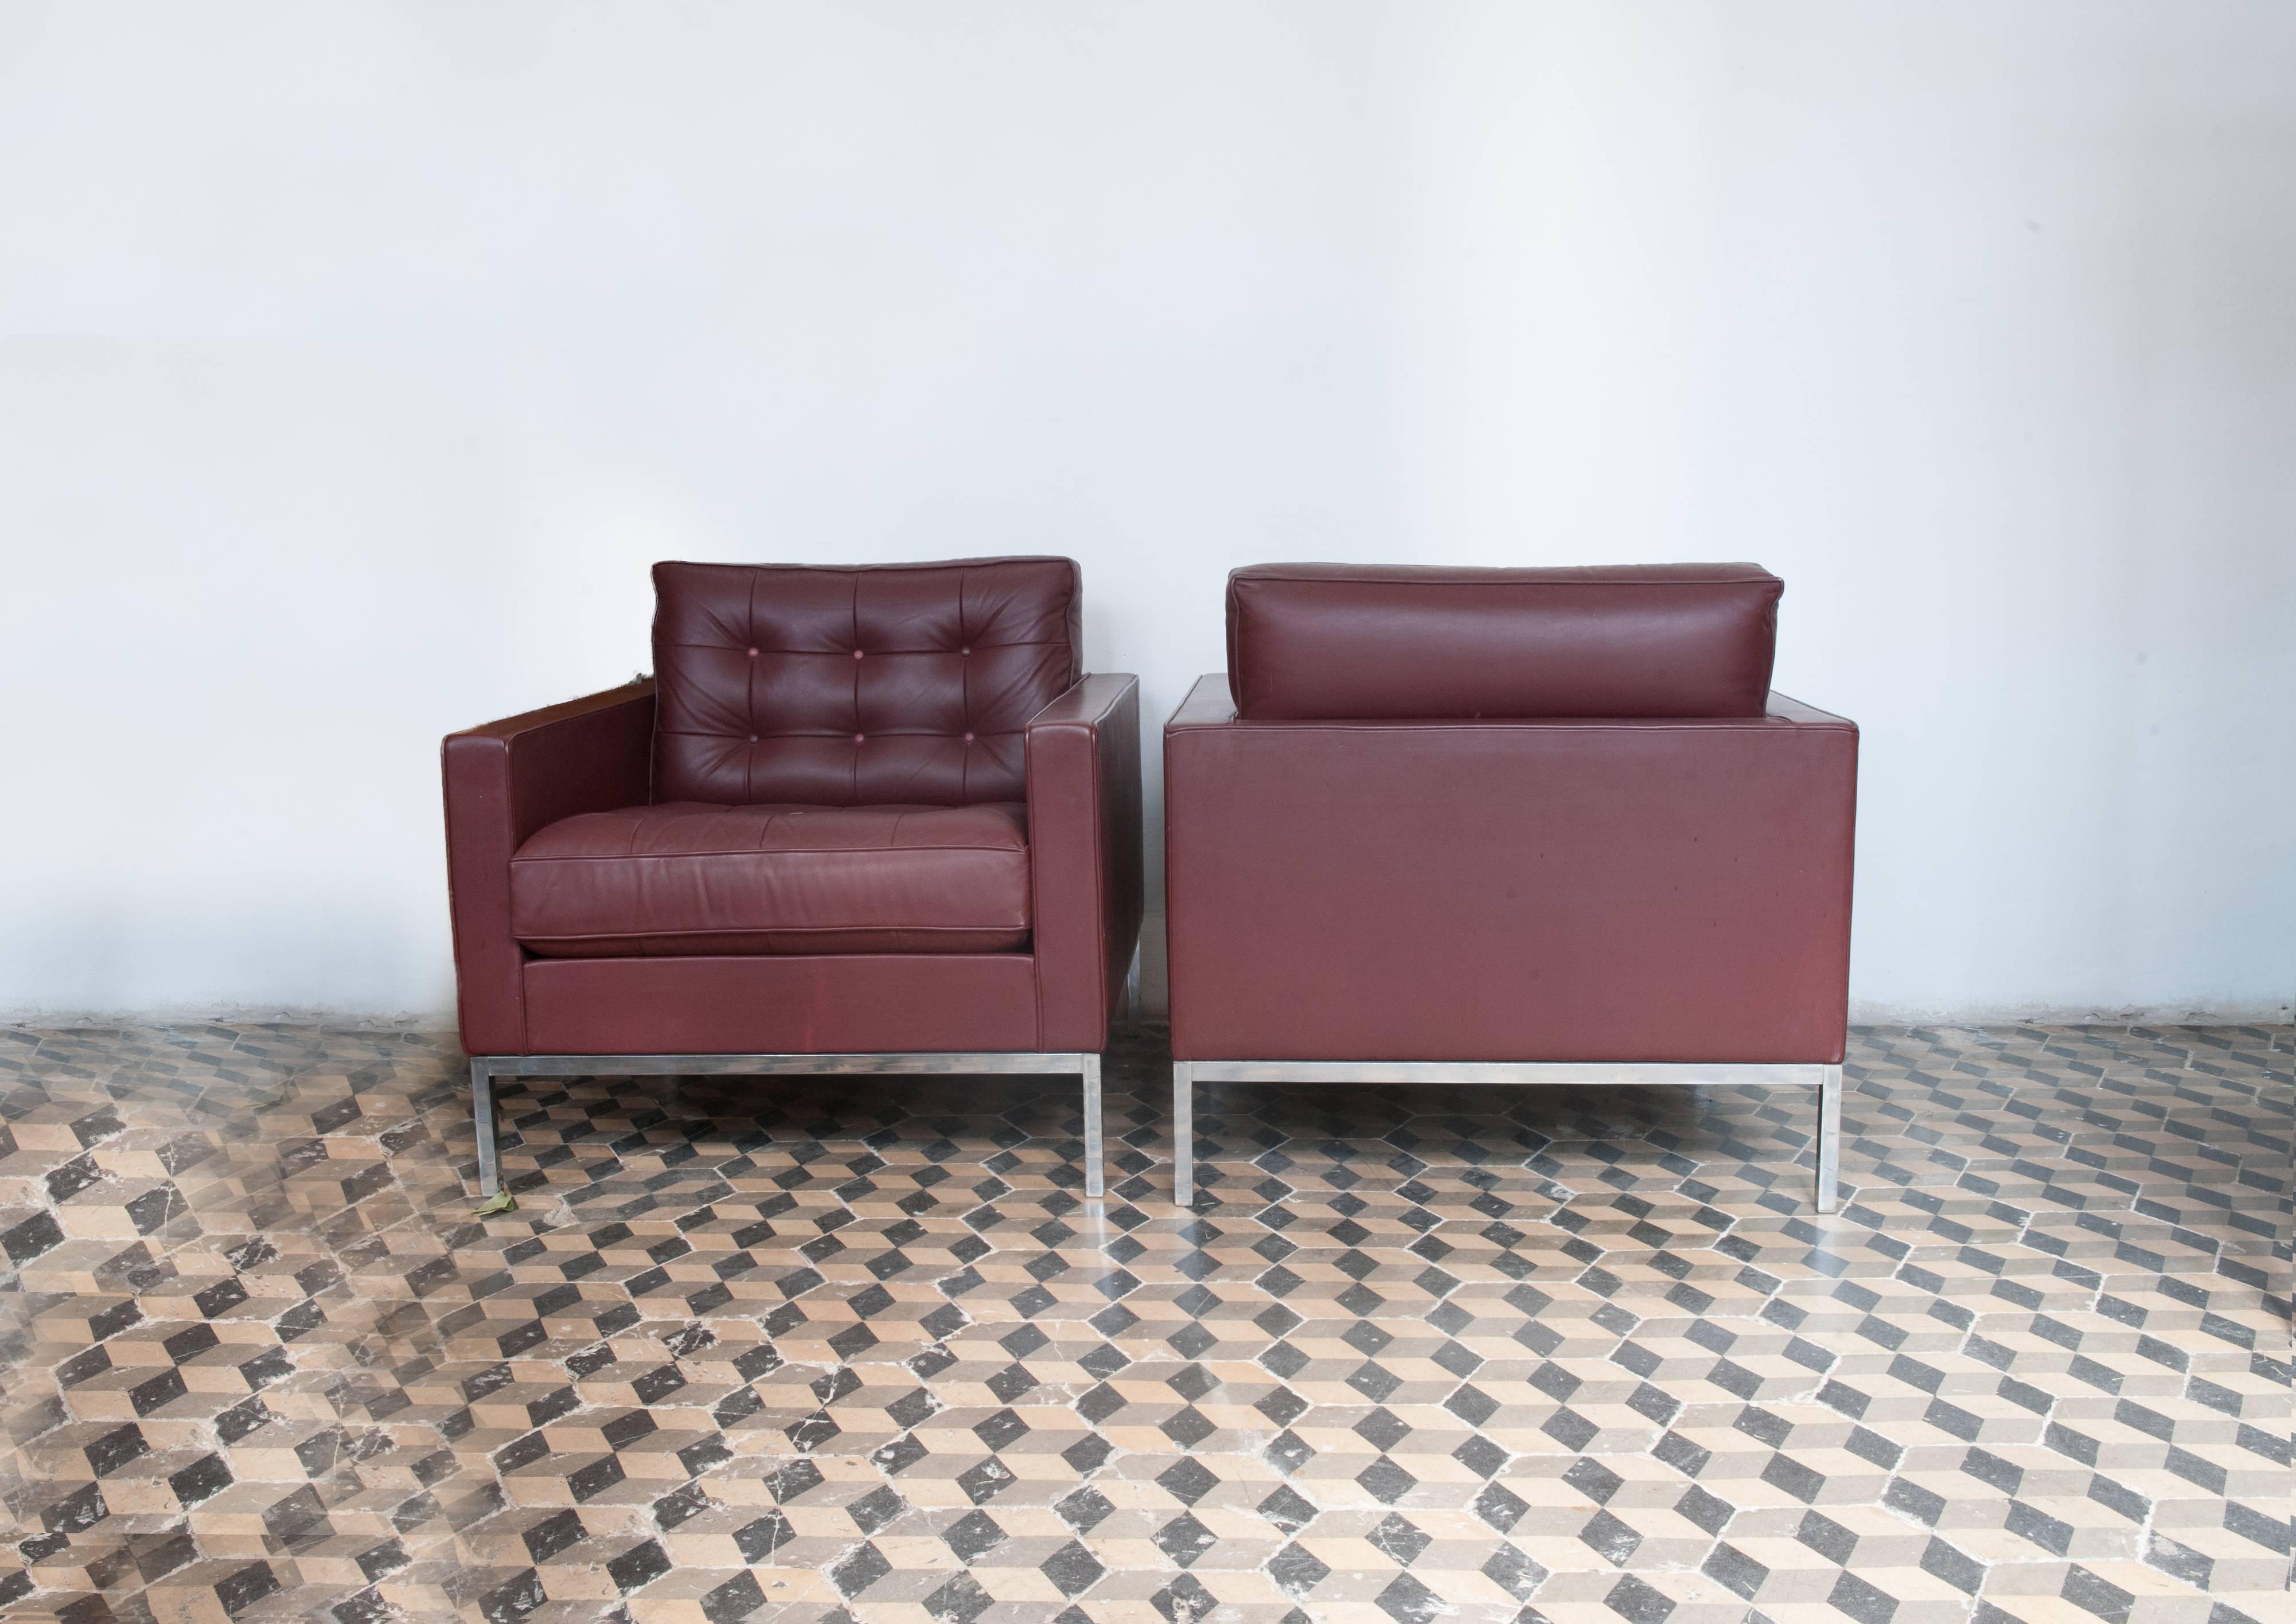 Florence Knoll club lounge chairs are a timeless example of a midcentury American design, fully tufted leather seat and back covering attached to an exposed metal chromed frame and legs. In original good condition. Signed by Knoll 1980s.